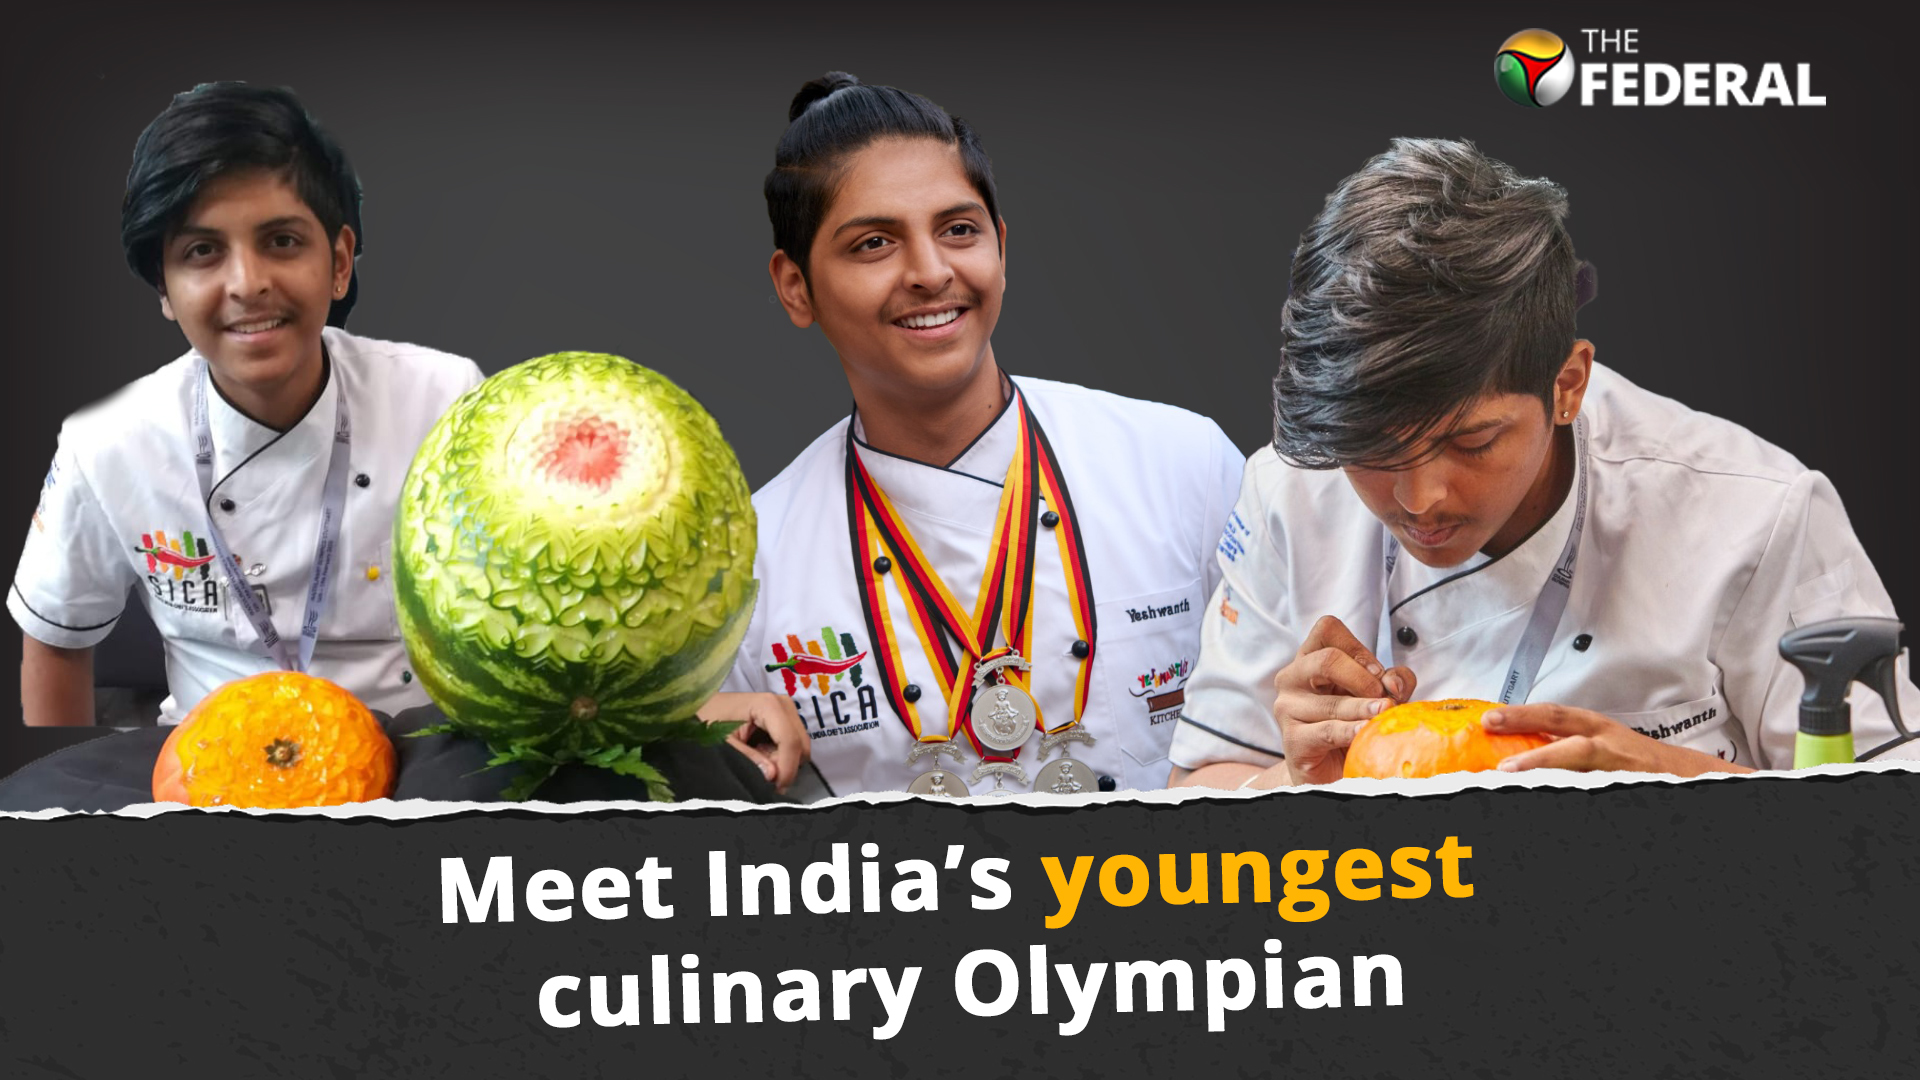 Only 16, Indias culinary olympian brings home silver